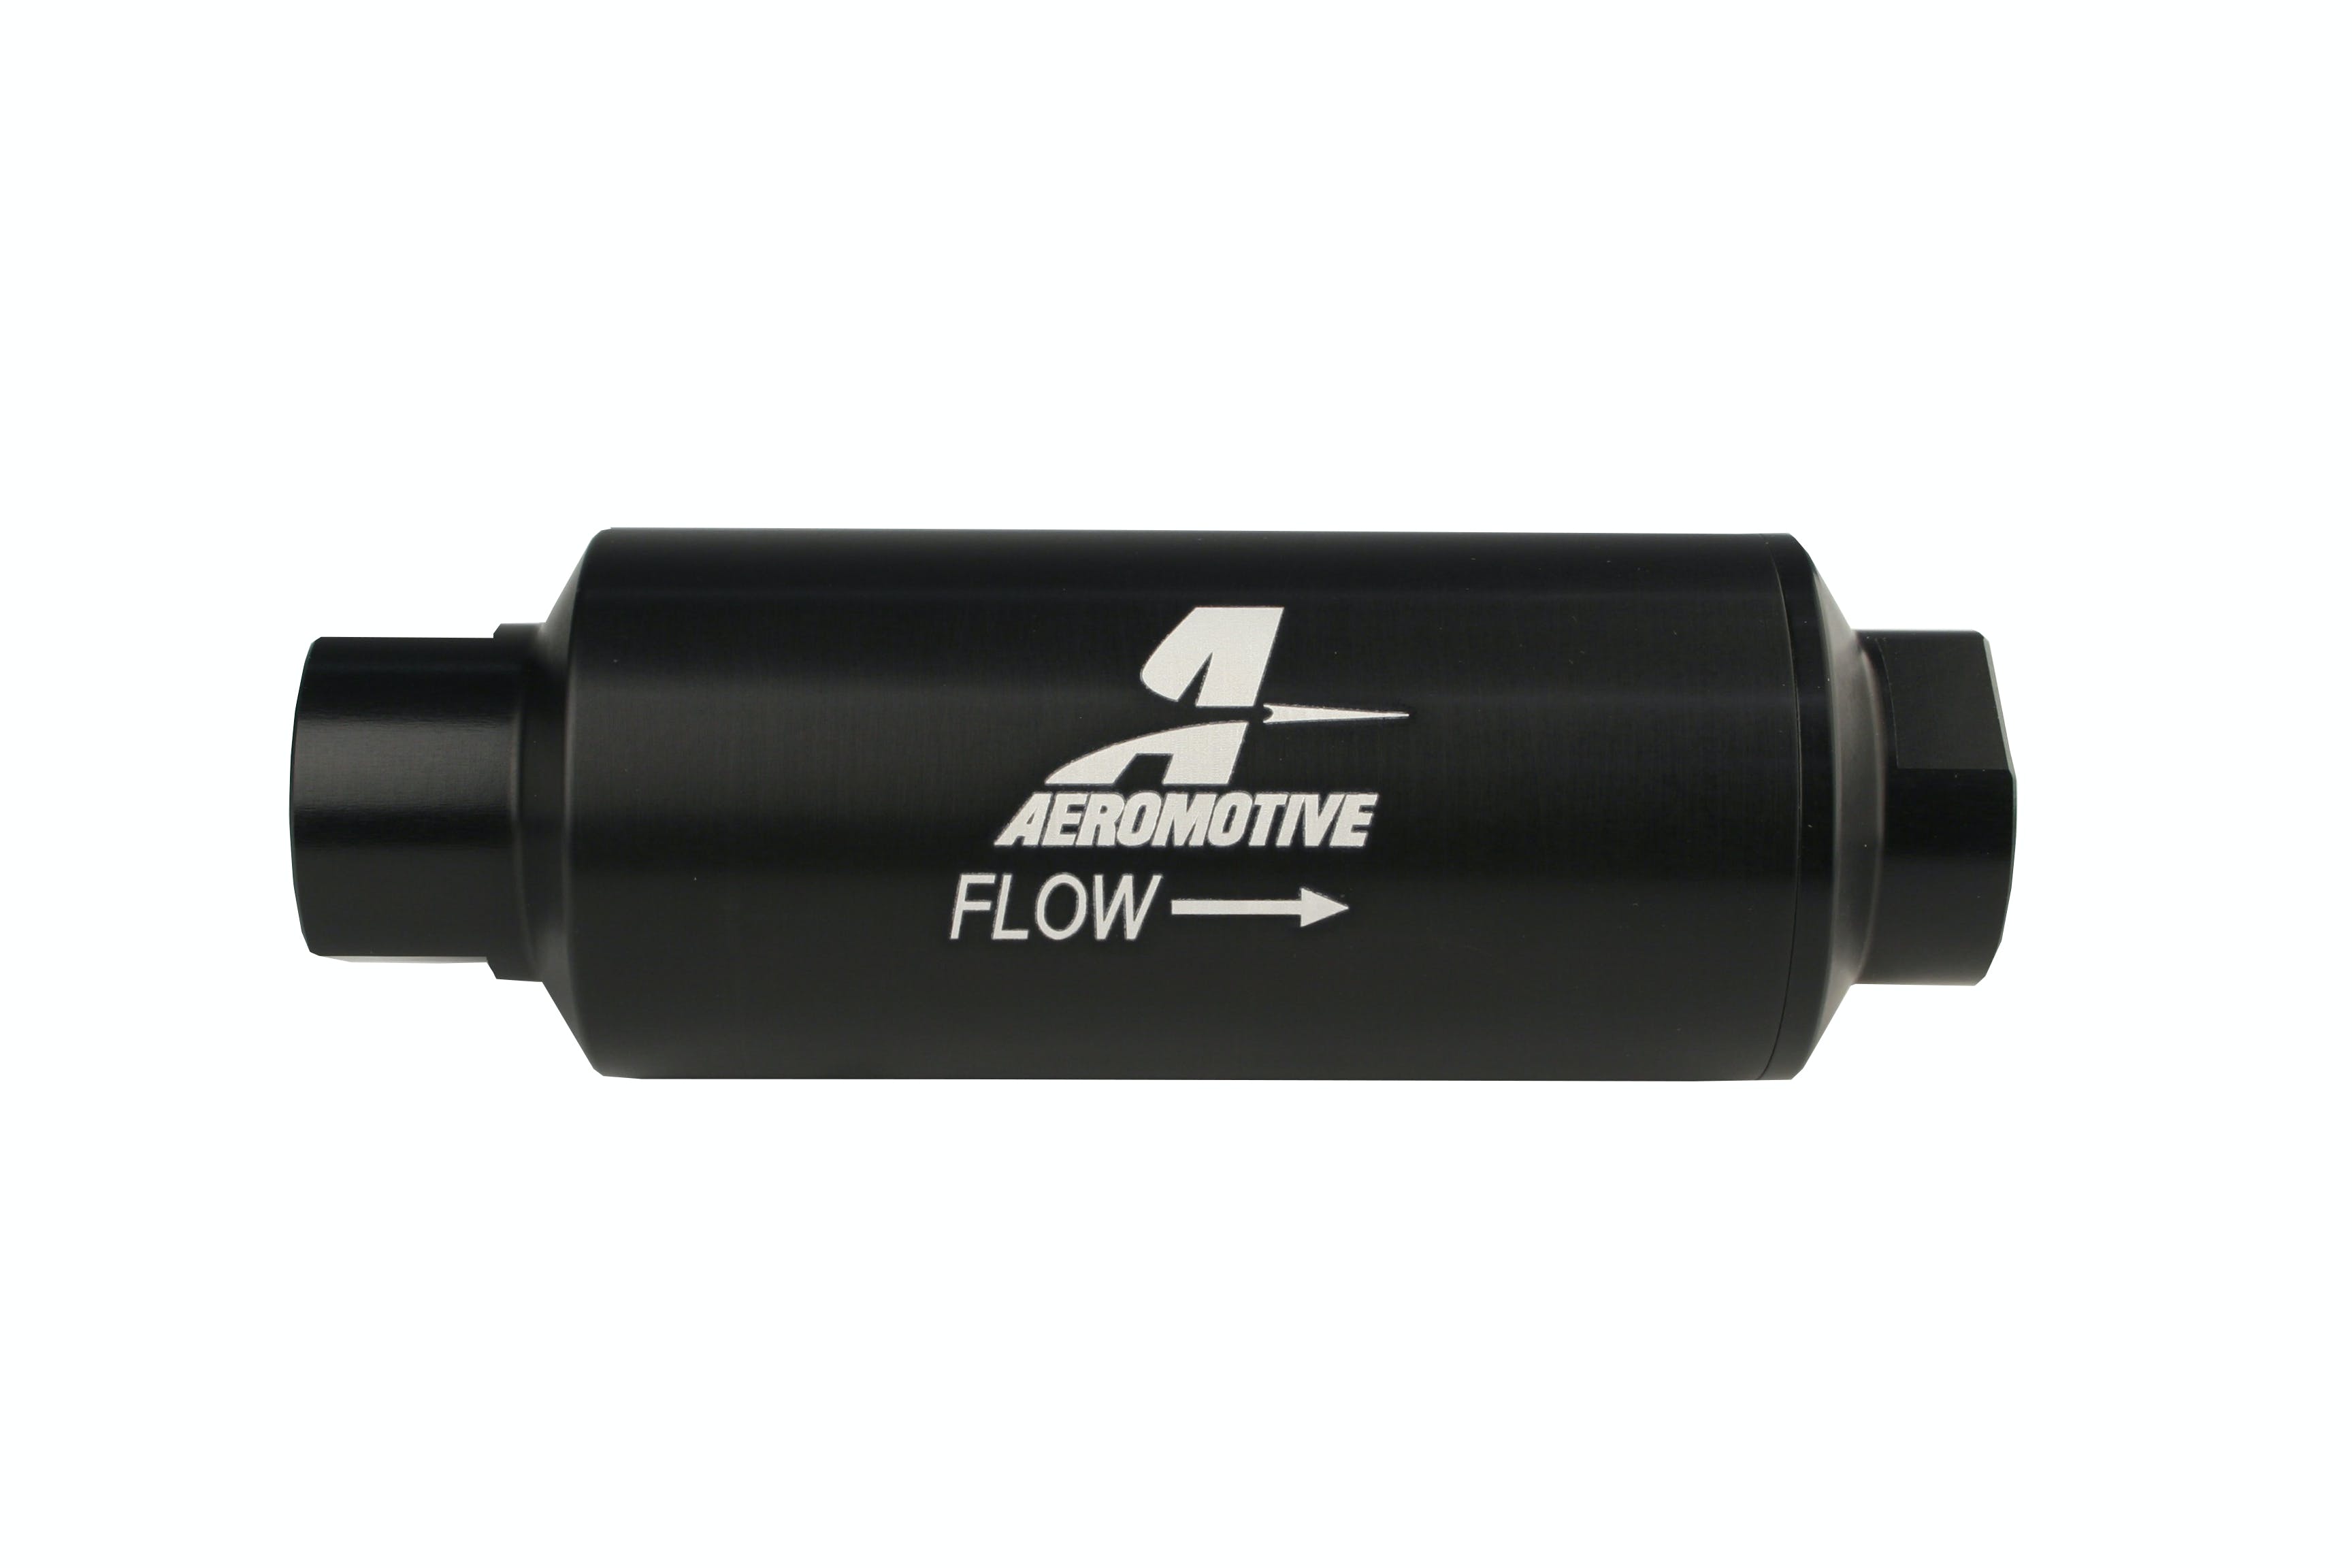 Aeromotive Fuel System 12309 Marine AN-12 Fuel Filter (100 Micron Stainless Steel Element)